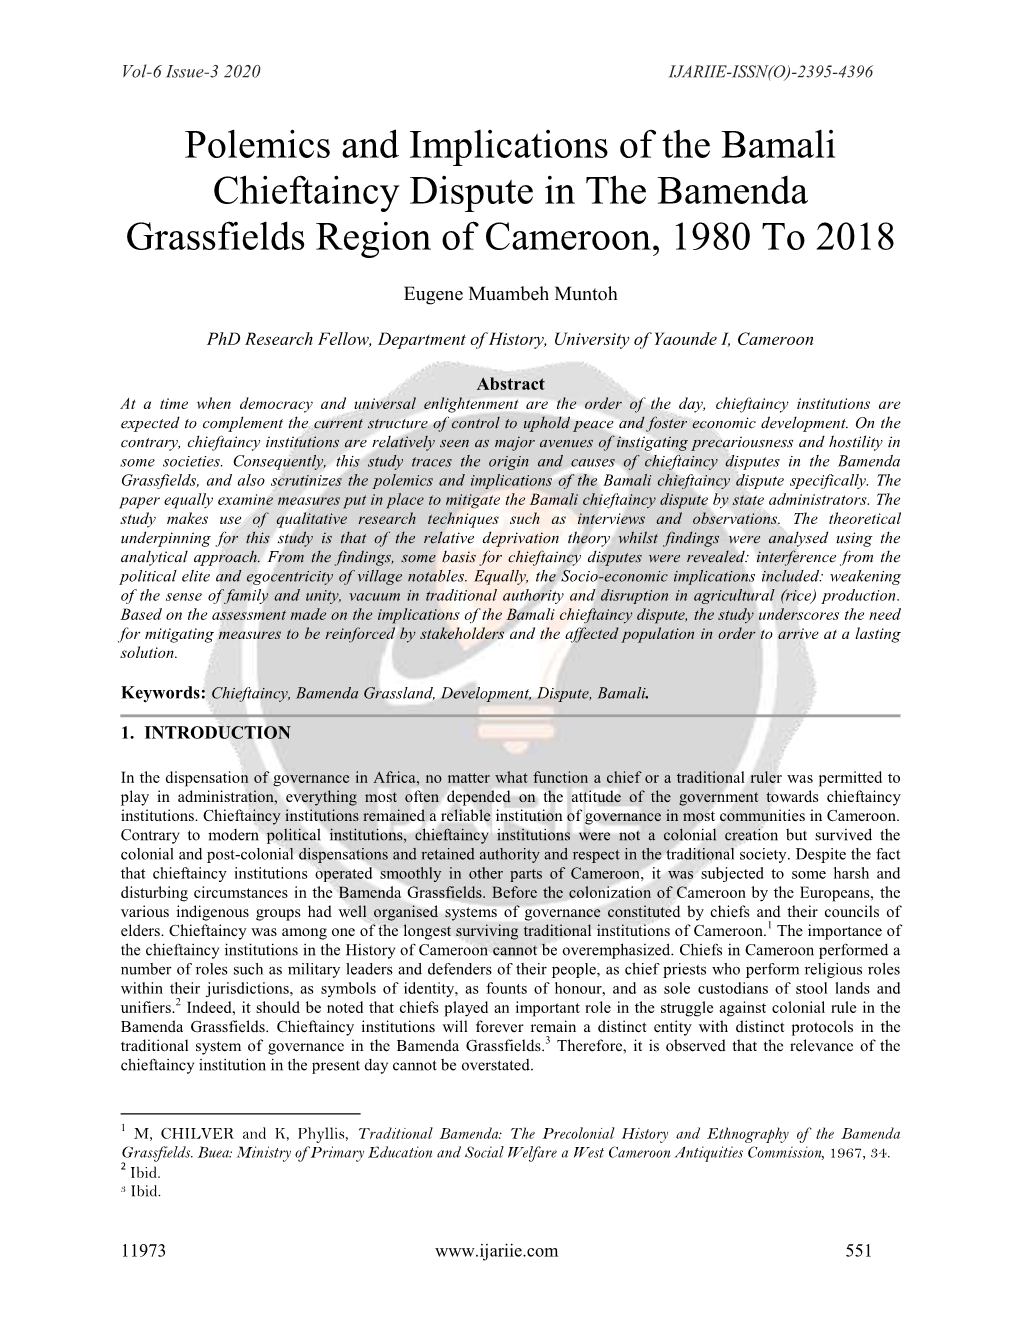 Polemics and Implications of the Bamali Chieftaincy Dispute in the Bamenda Grassfields Region of Cameroon, 1980 to 2018